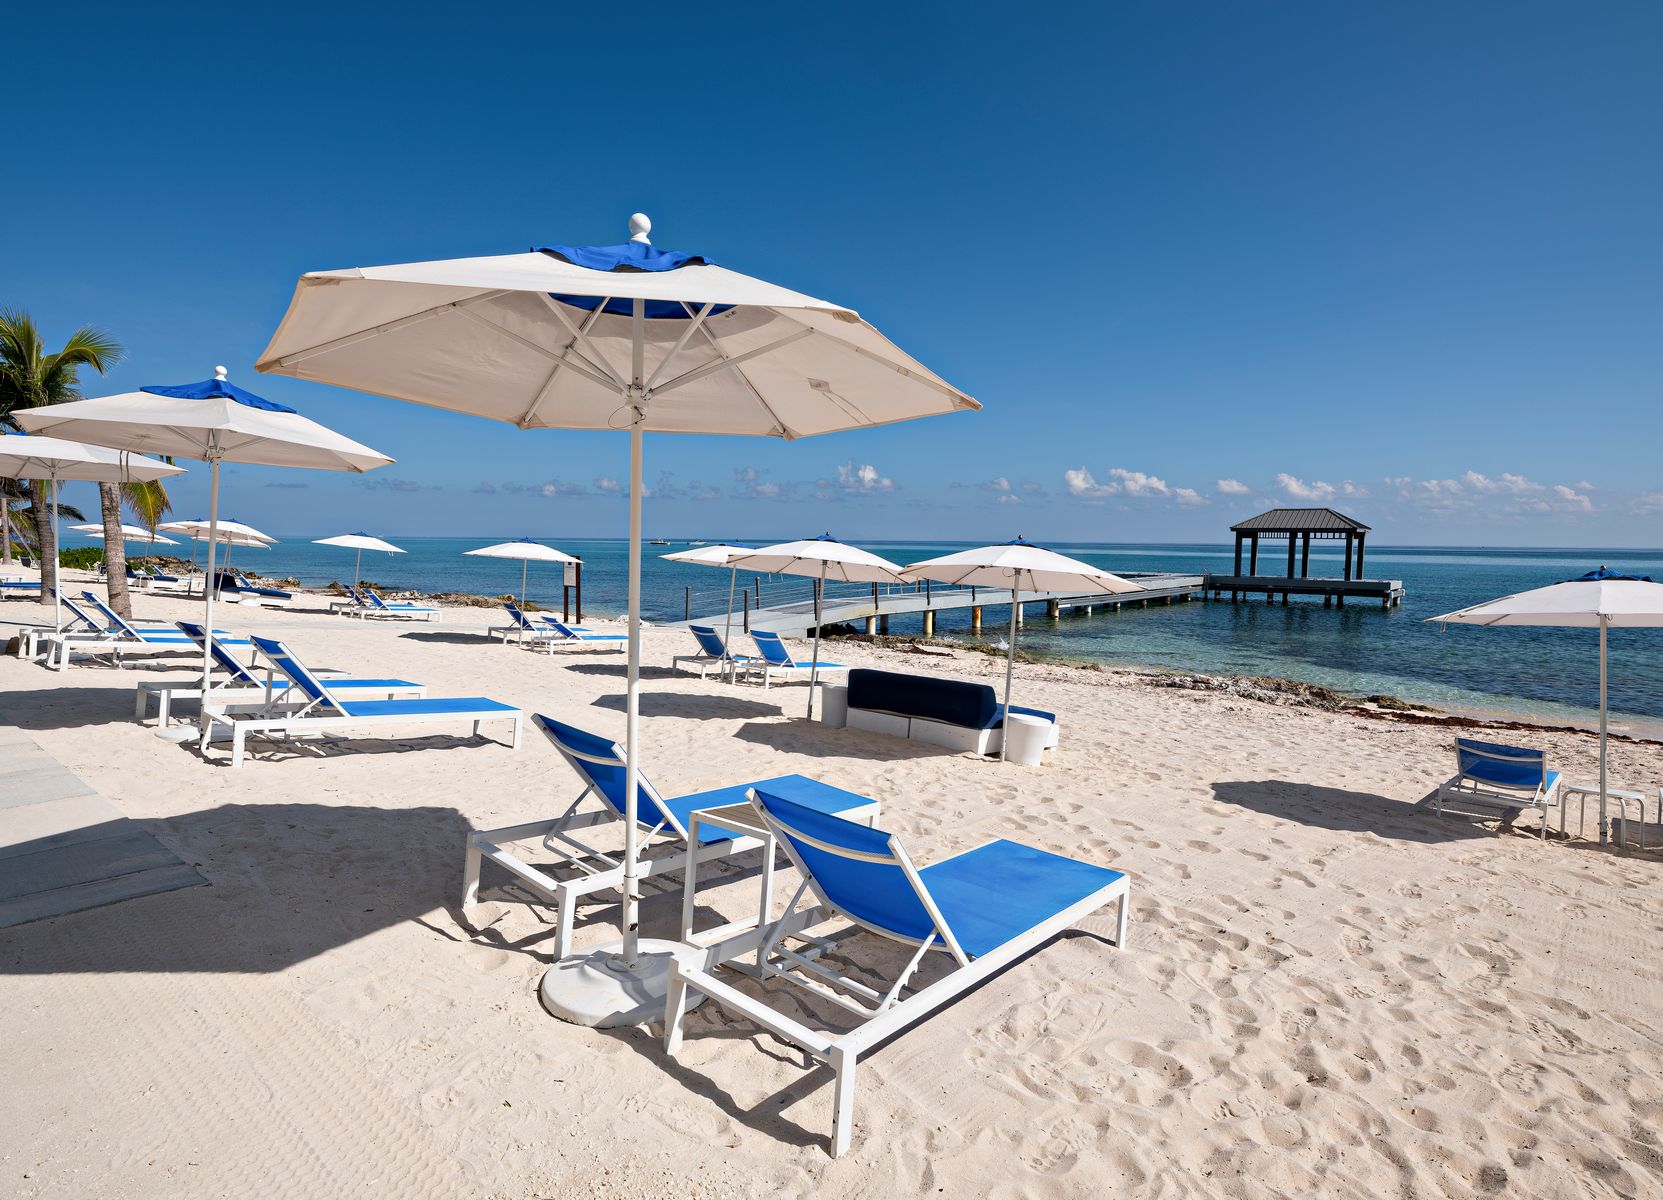 The view from a Grand Cayman Beach Suites.